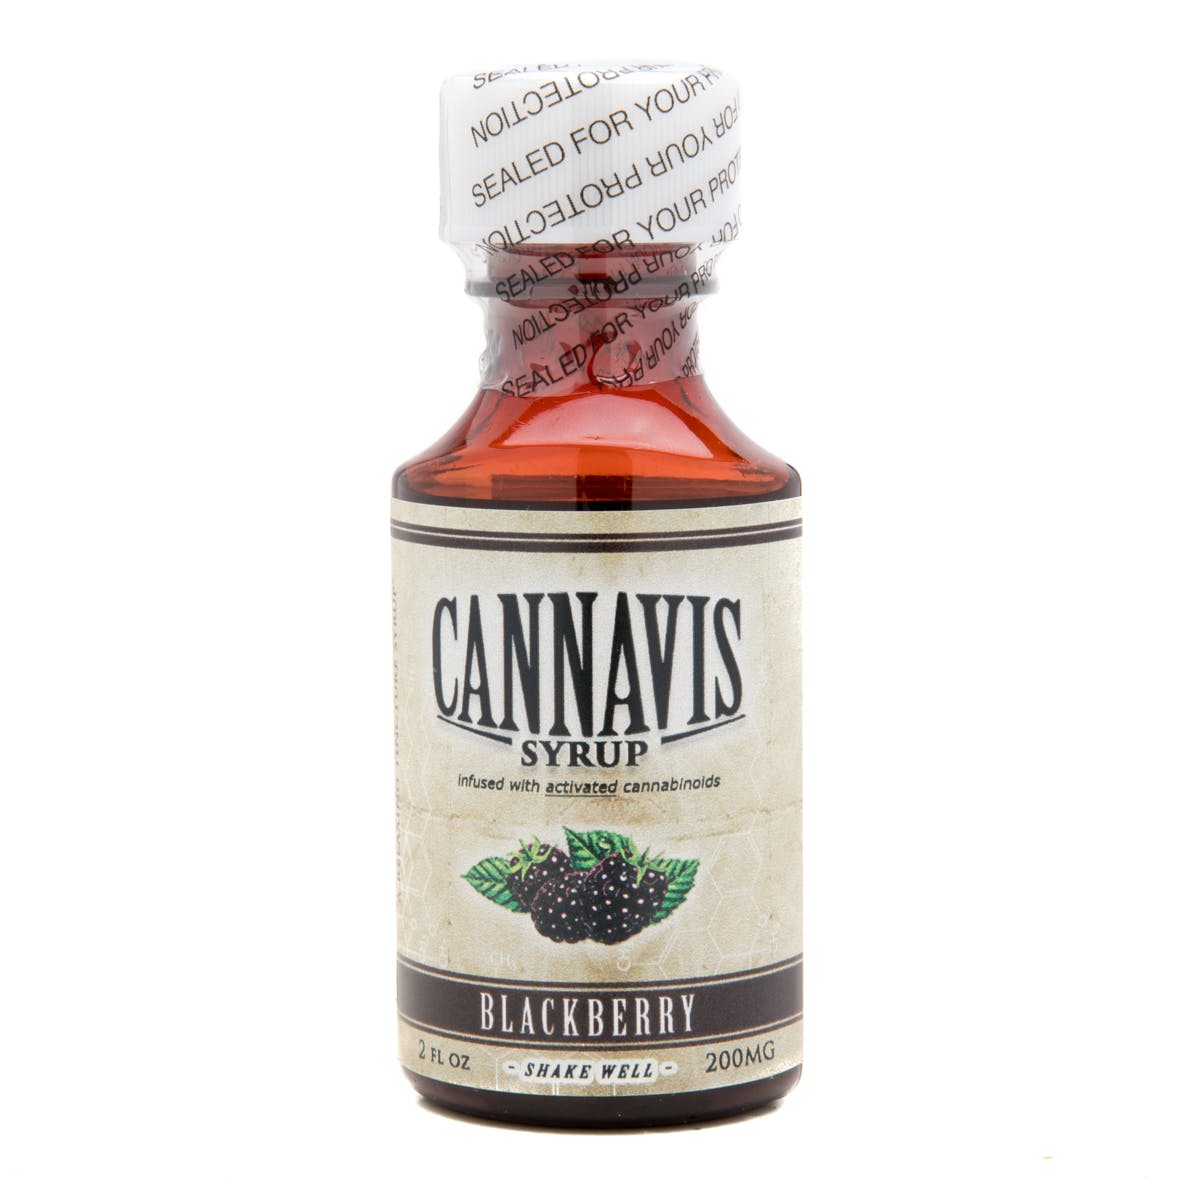 marijuana-dispensaries-church-of-holy-fire-in-city-of-industry-cannavis-syrup-2c-blackberry-200mg